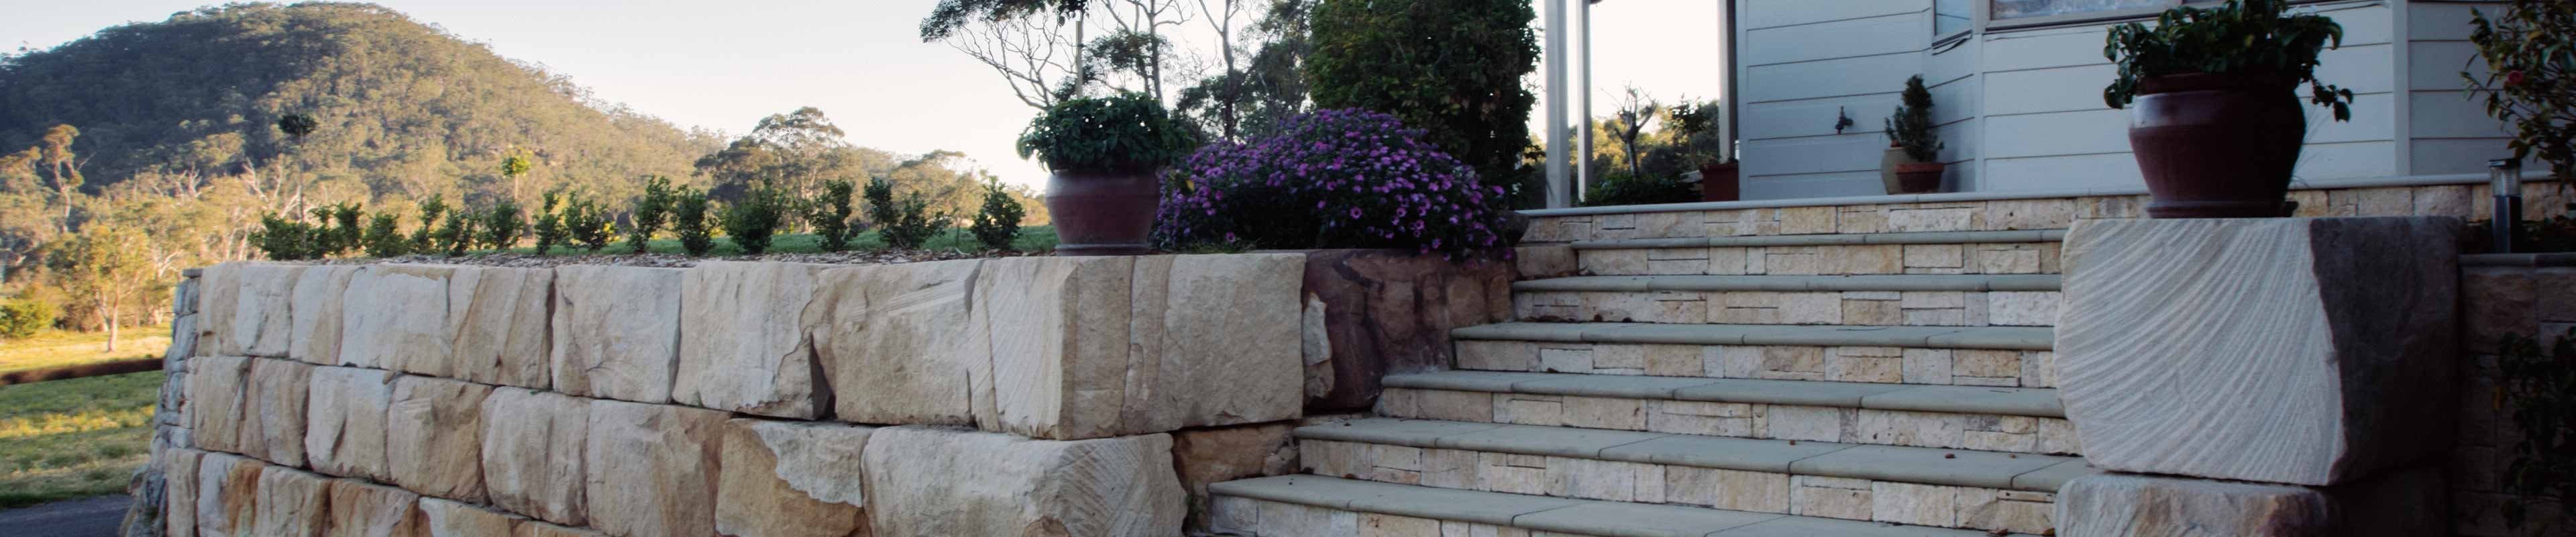 Image of a home entry with stairway and retaining wall, hill off in the distance.